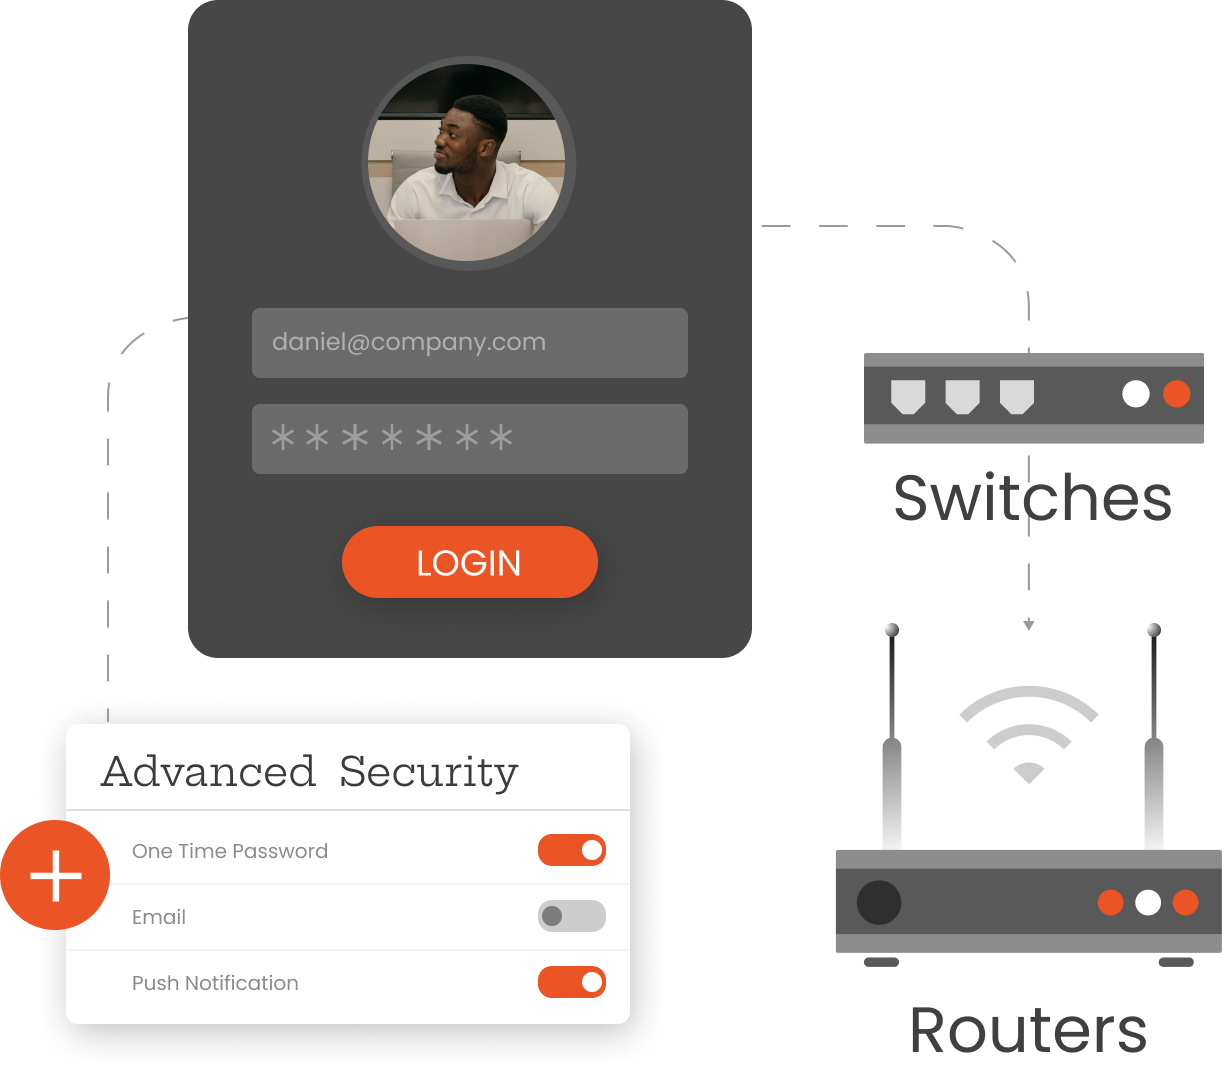 Network Security Devices: secure network by switches and routers